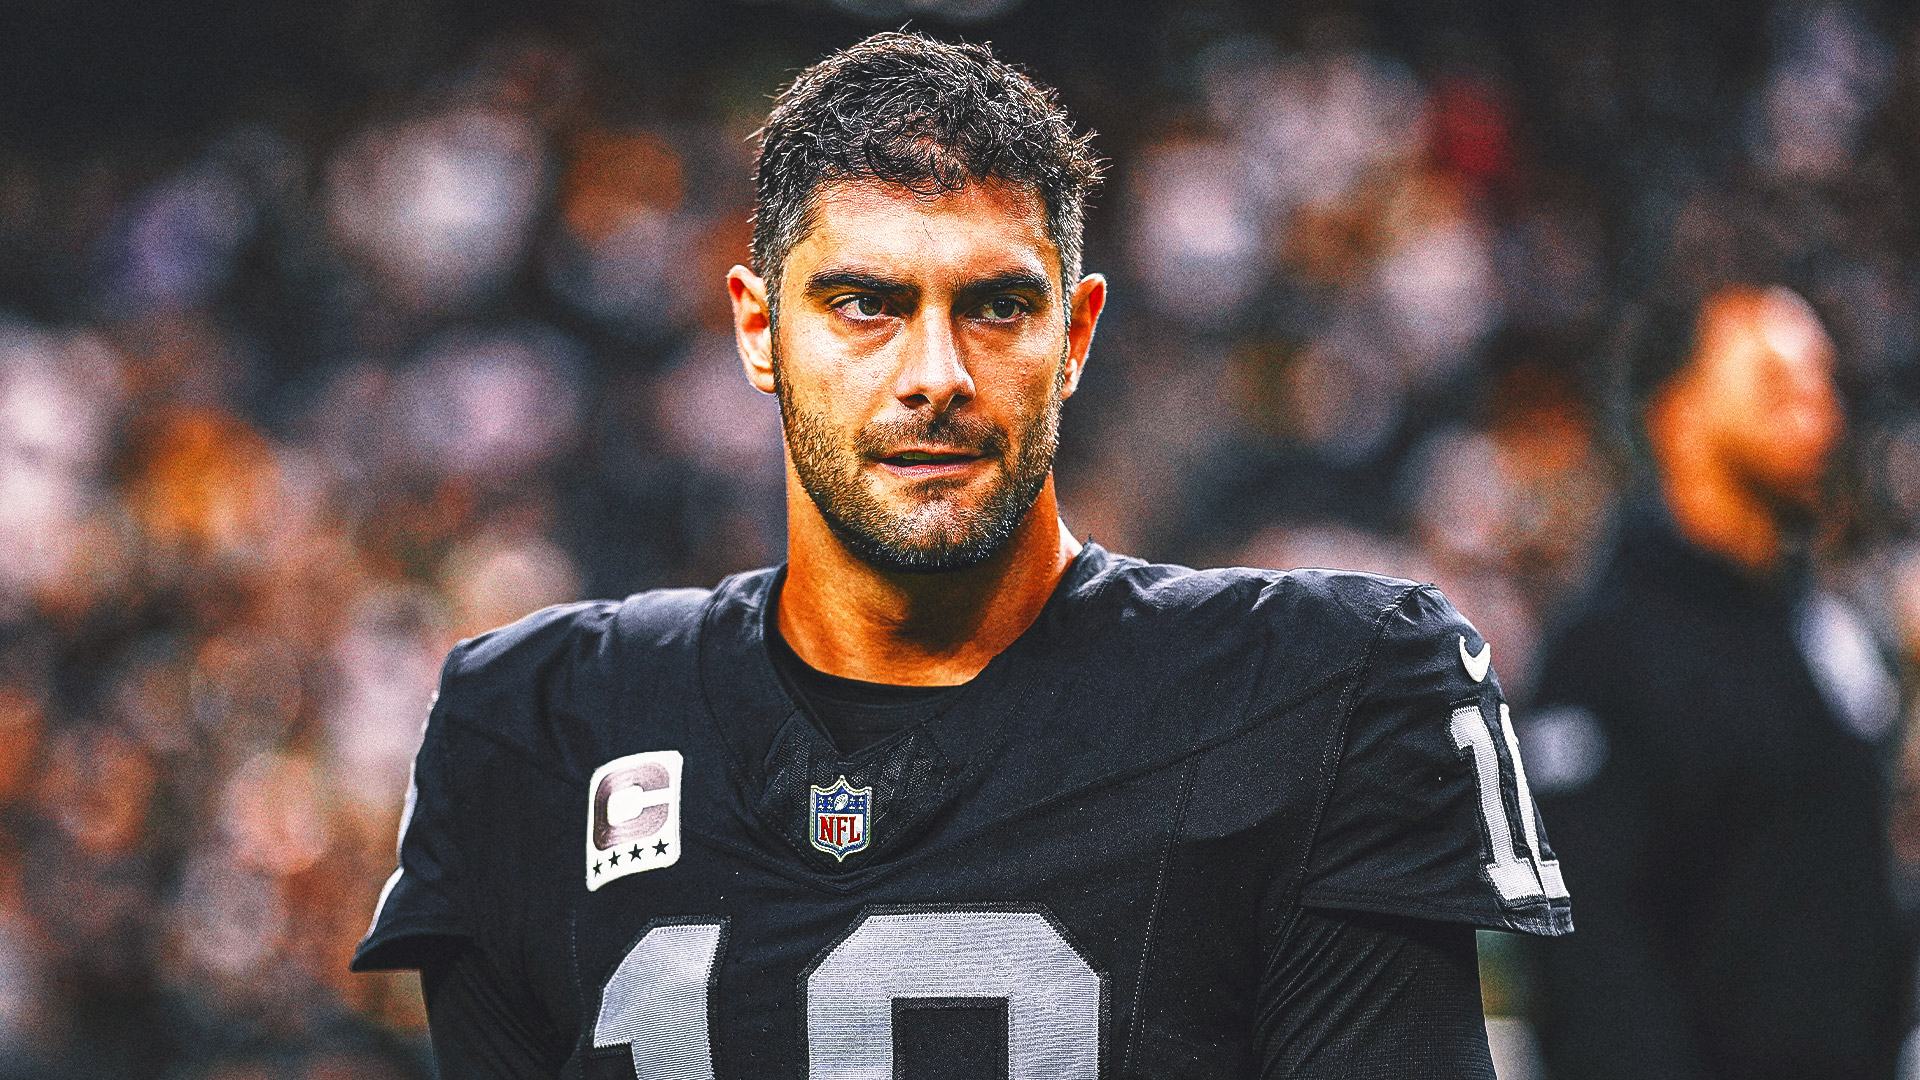 Jimmy Garoppolo discloses reason for PED suspension, excited for fresh start with Rams